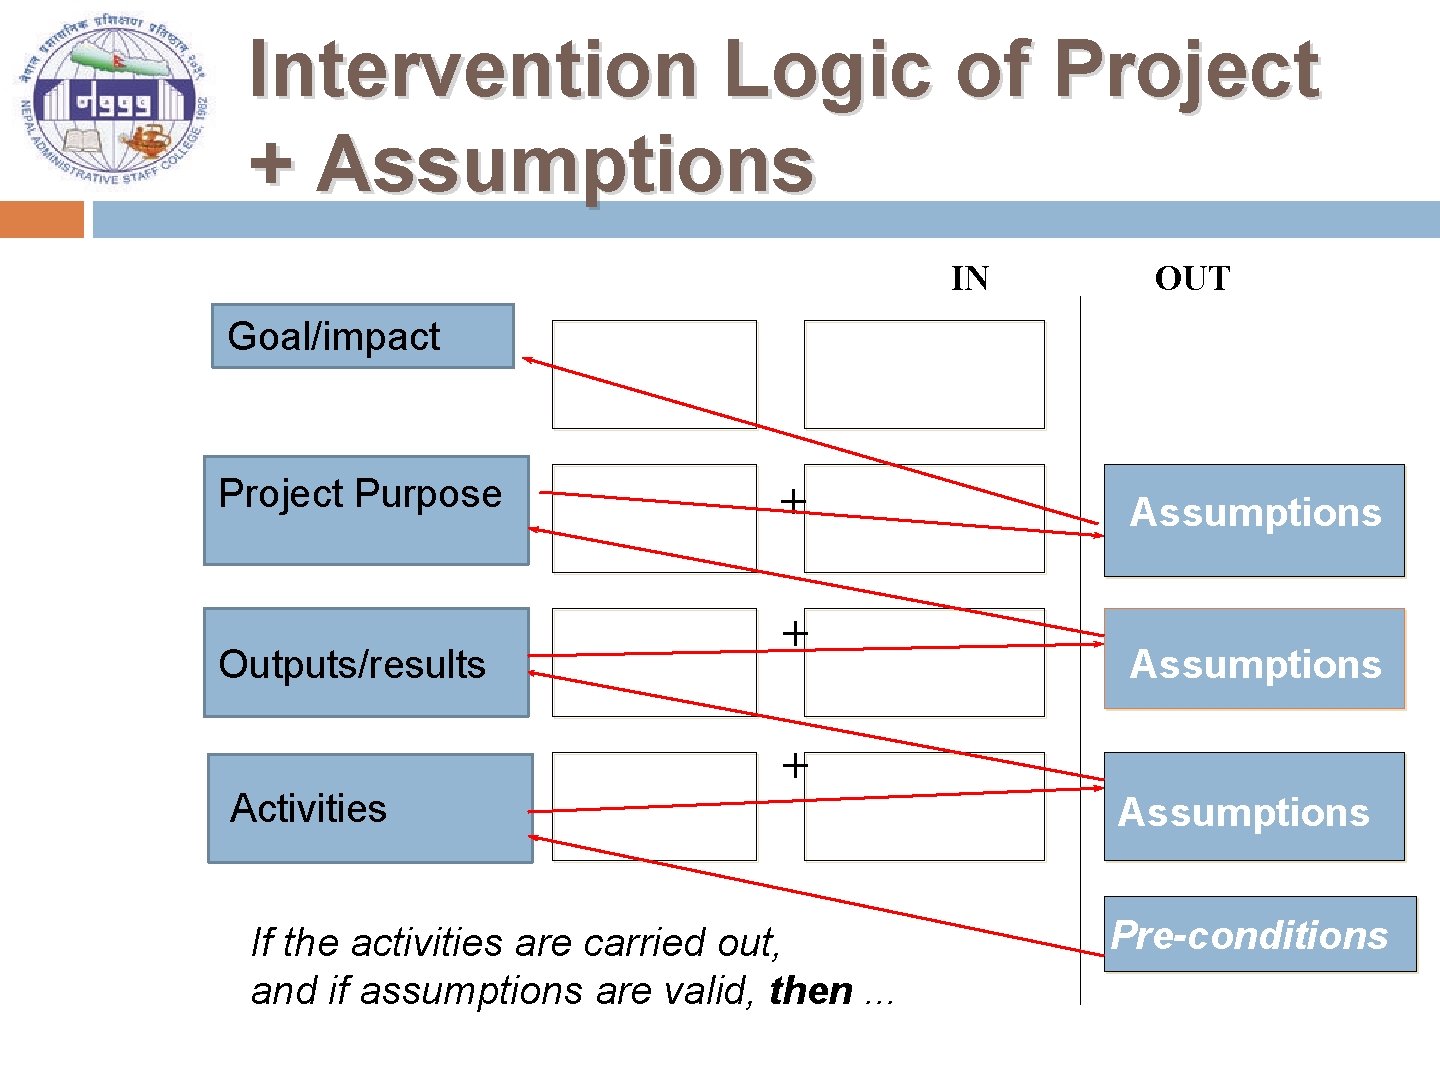 Intervention Logic of Project + Assumptions IN OUT Goal/impact Project Purpose Outputs/results Activities +